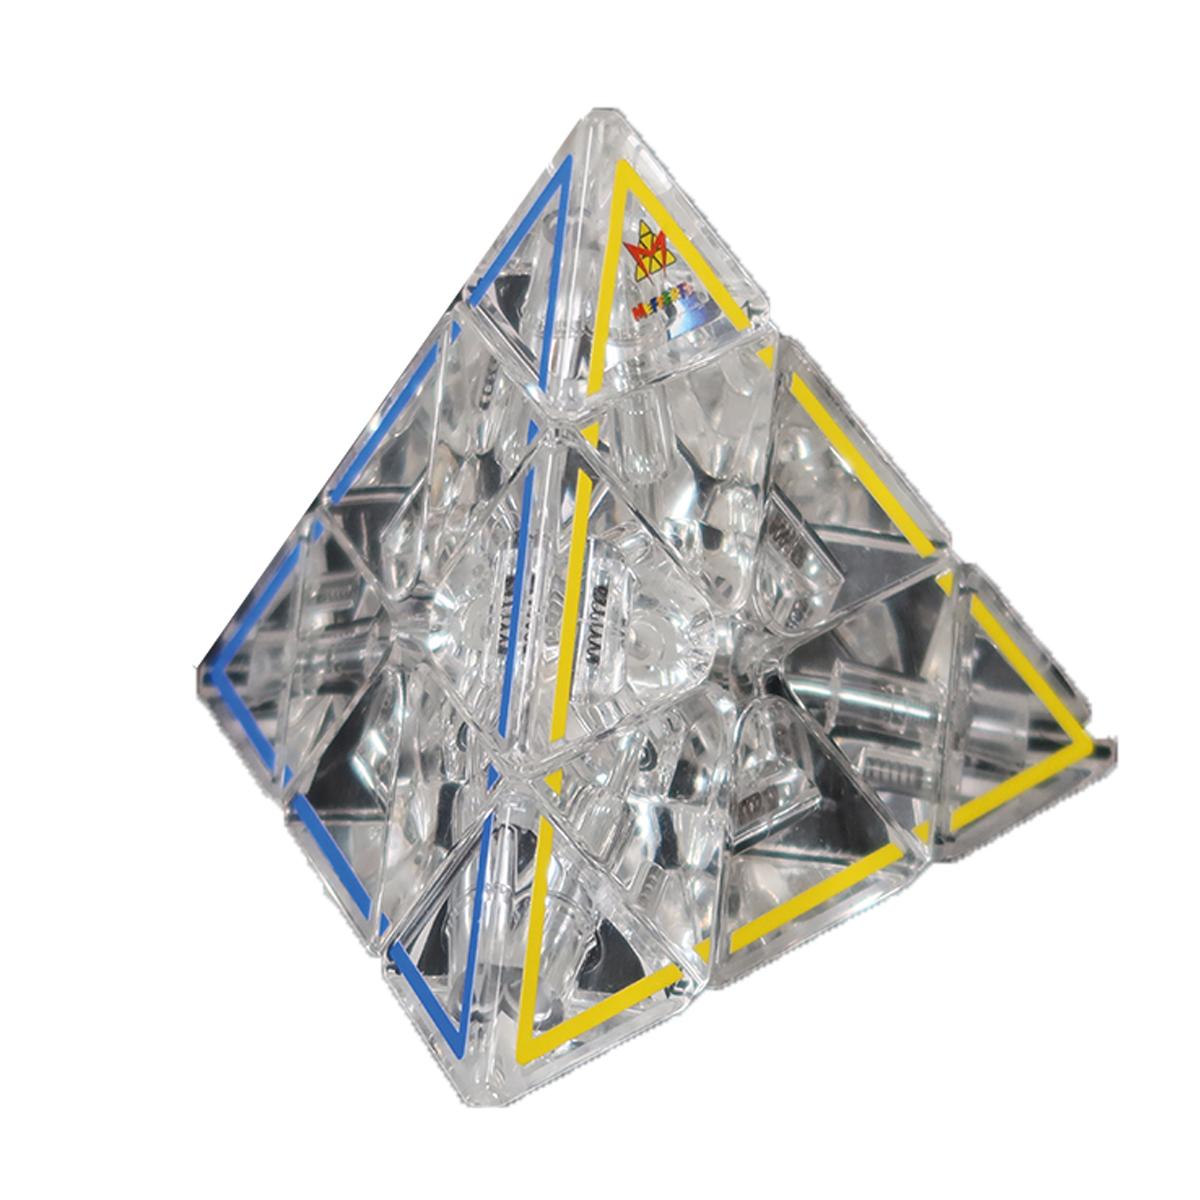 Pyraminx clear, pyramid-shaped puzzle by Meffert.